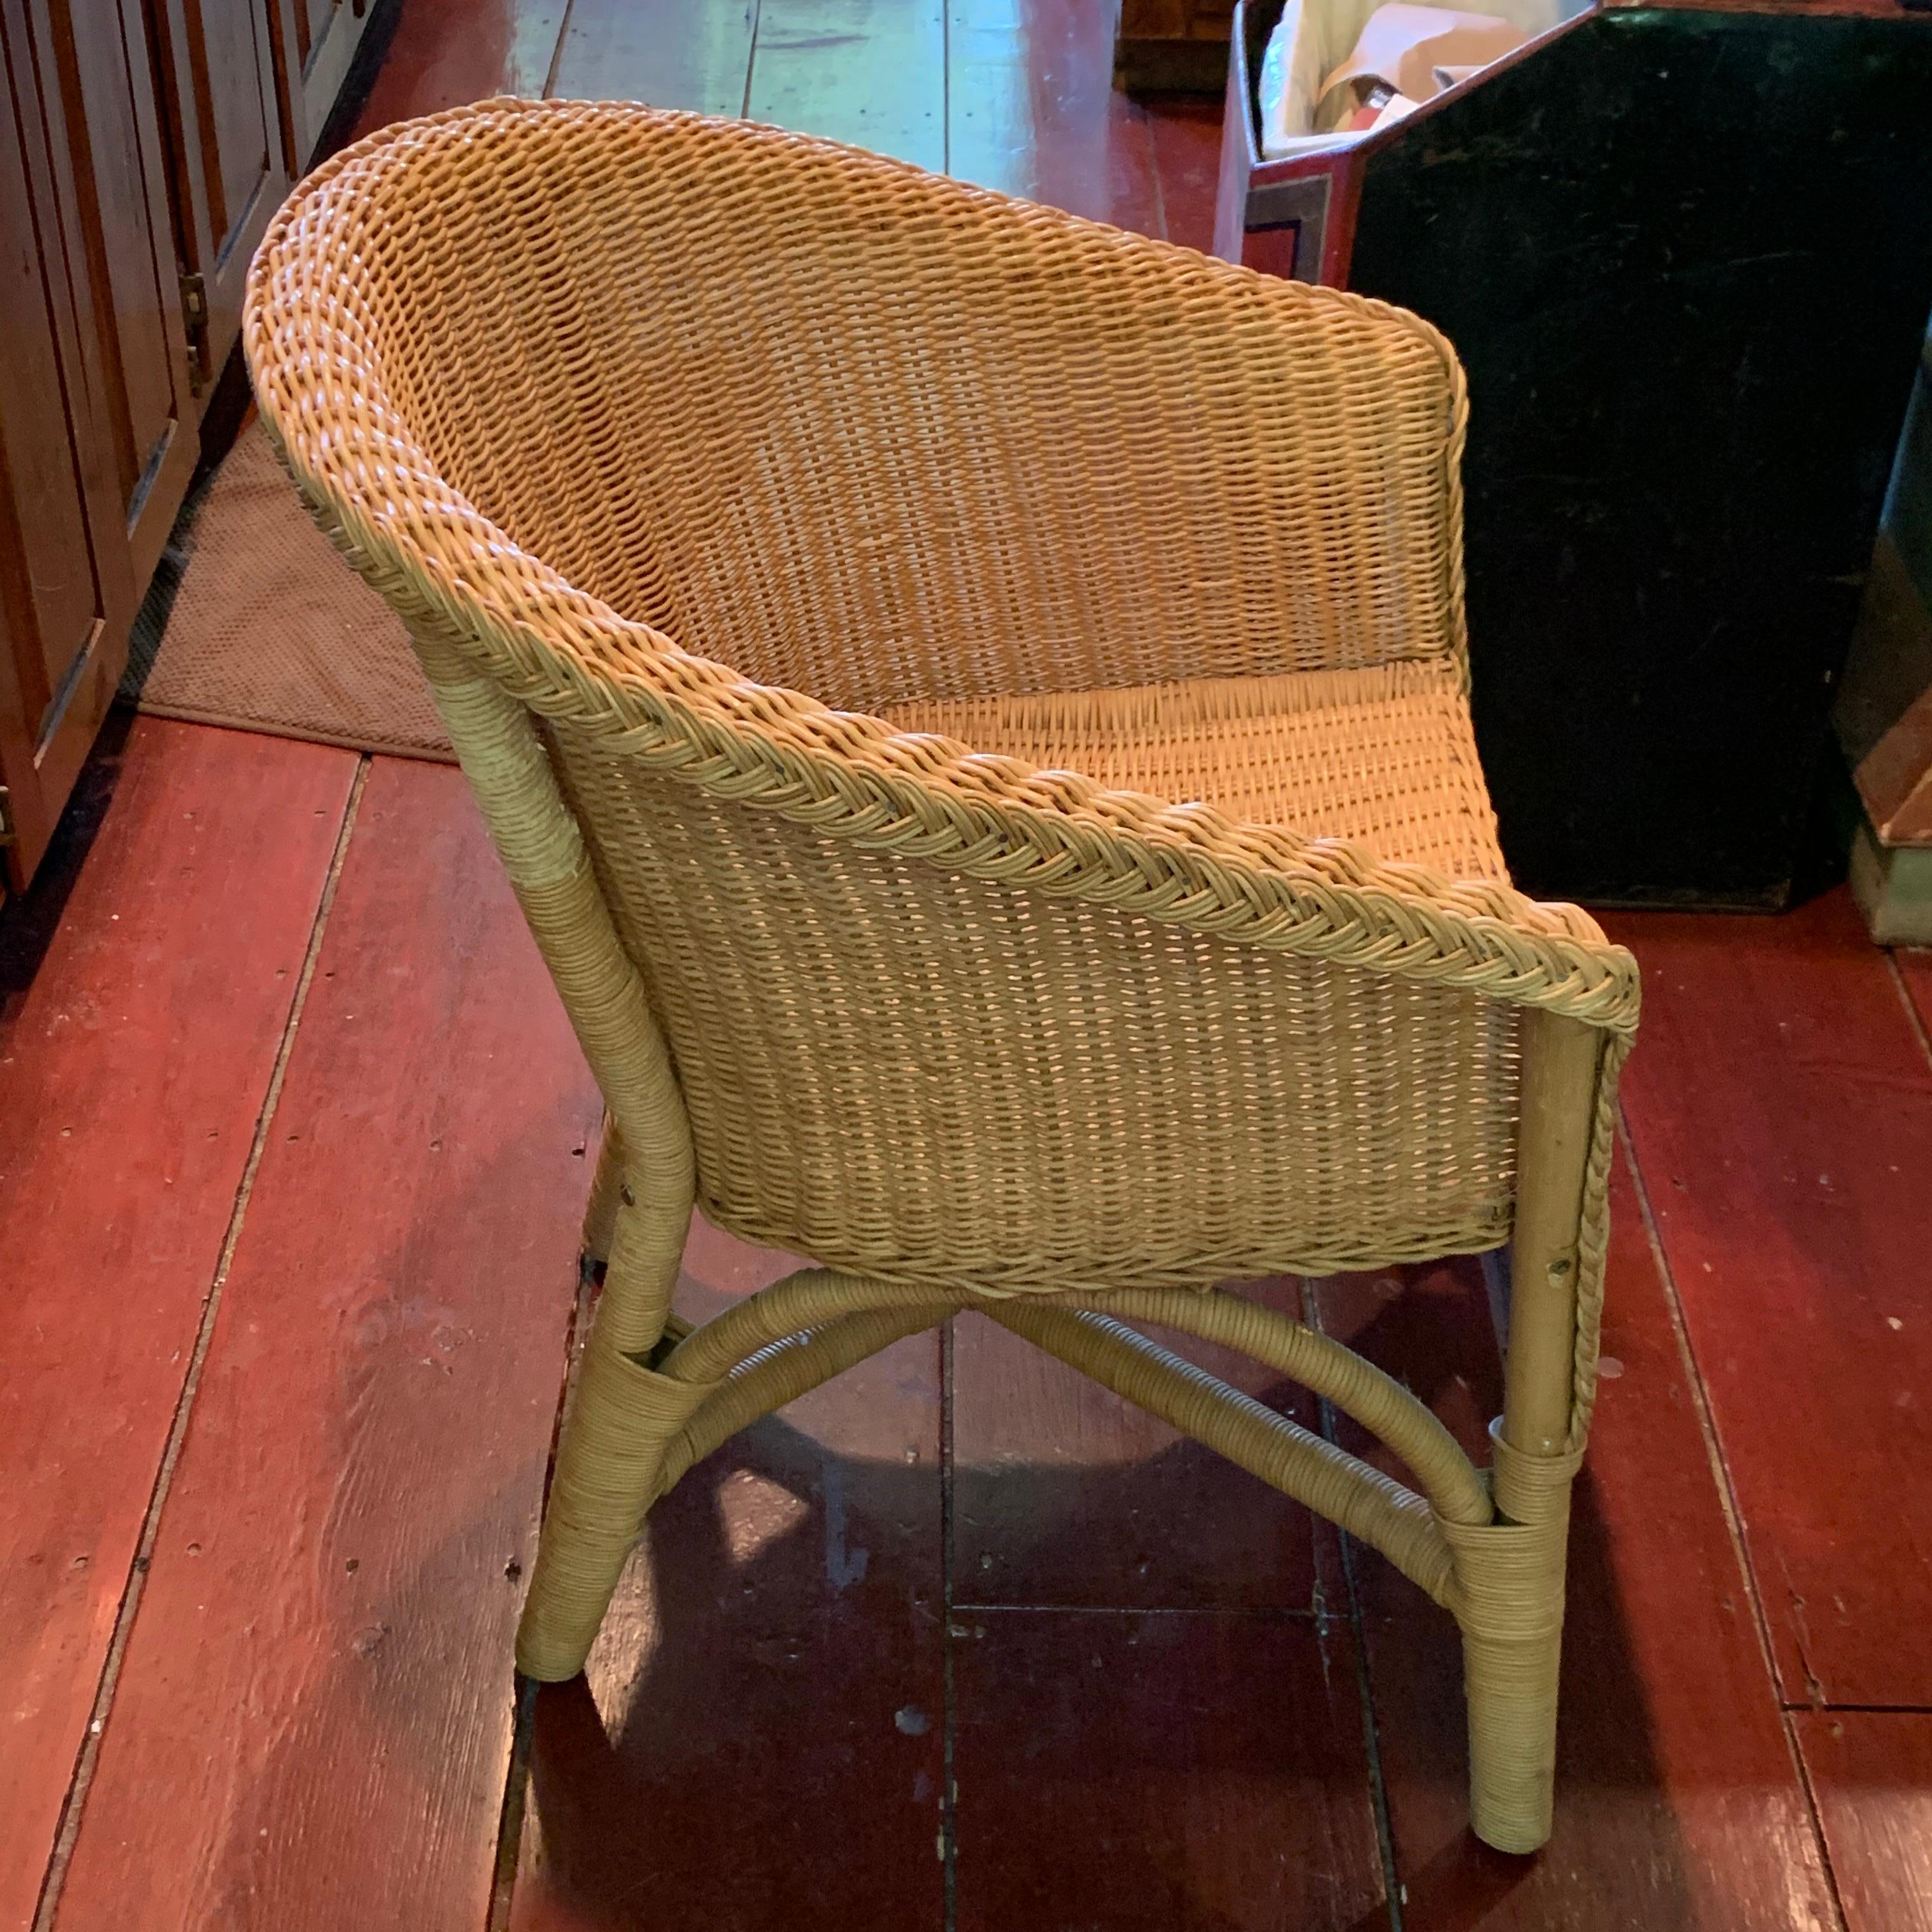 Contemporary set of four wicker curved back dining chairs.
Slight color variance on the back frame of one of the chairs.